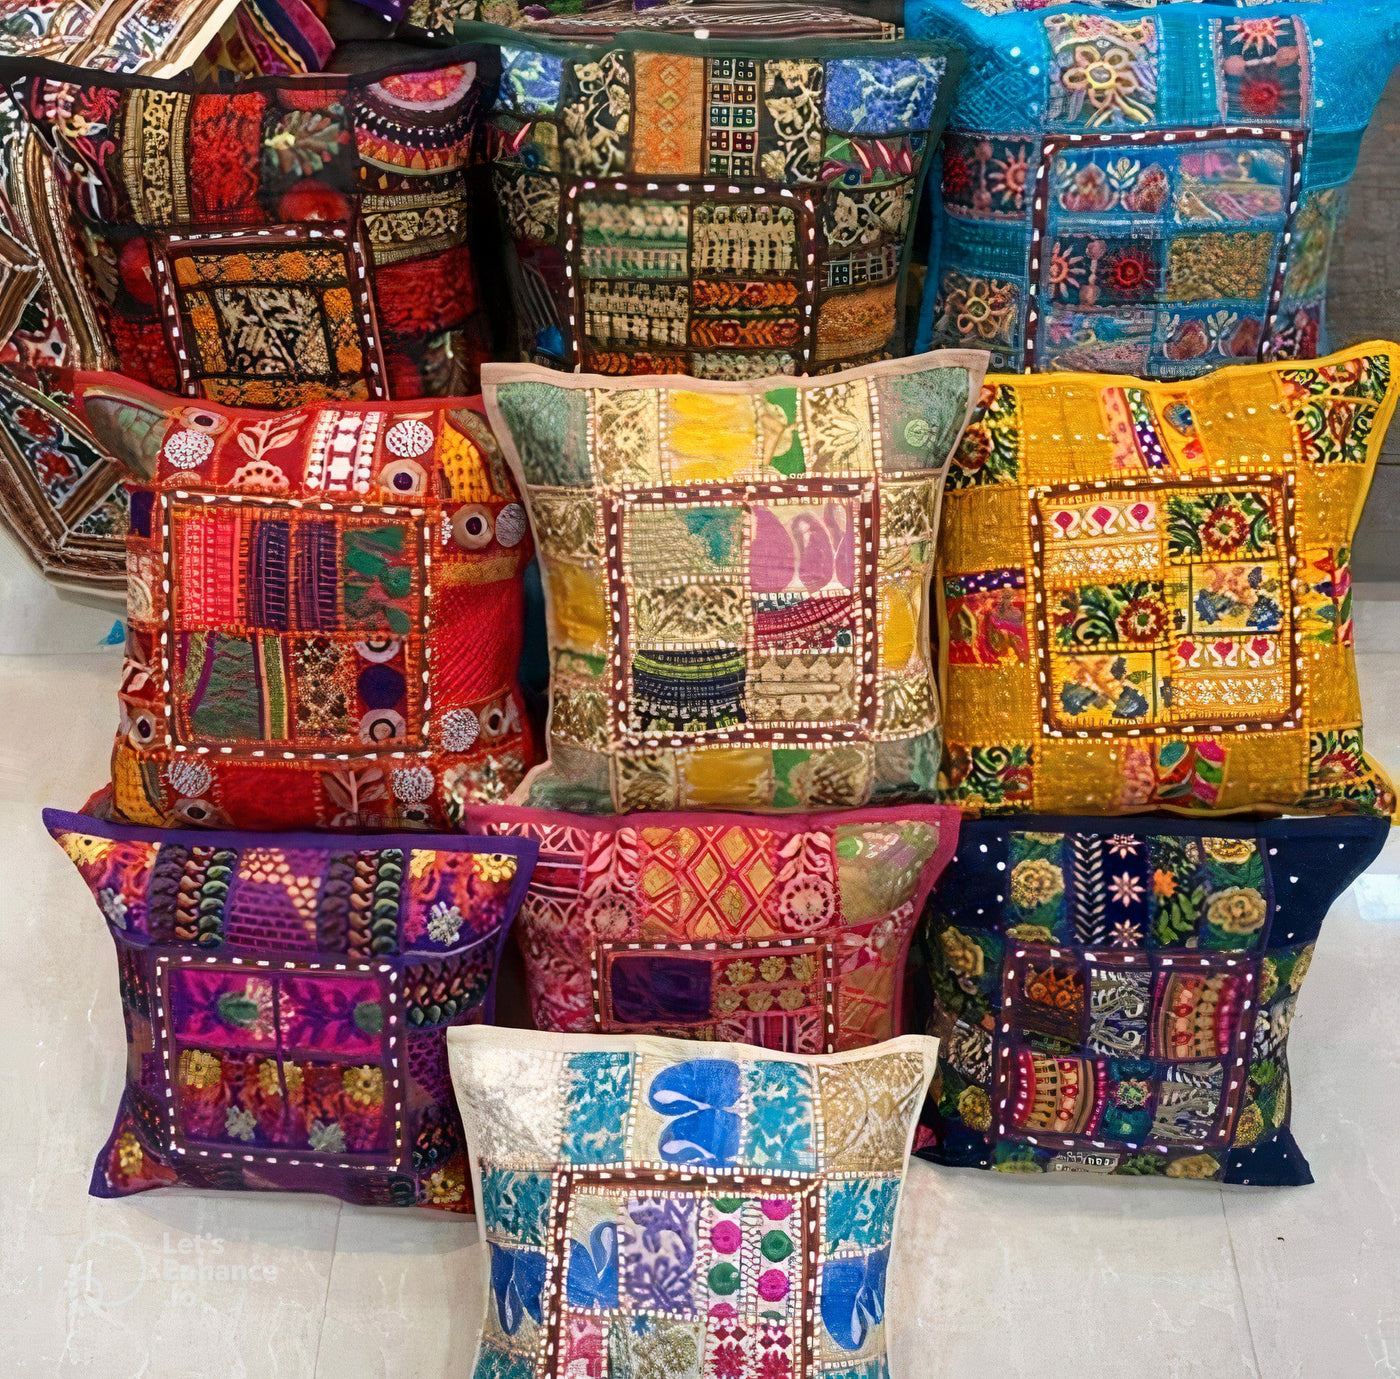 Lamansh cushion covers LAMANSH® Set of 5 Rajasthani Cotton Cushion Cover Embroidery Patchwork, Pillow Case Cushion Covers for Sofa Living Room Cushion Cover for Haldi Mehendi Wedding Decoration ✨ (16x16 inch Multi Color)